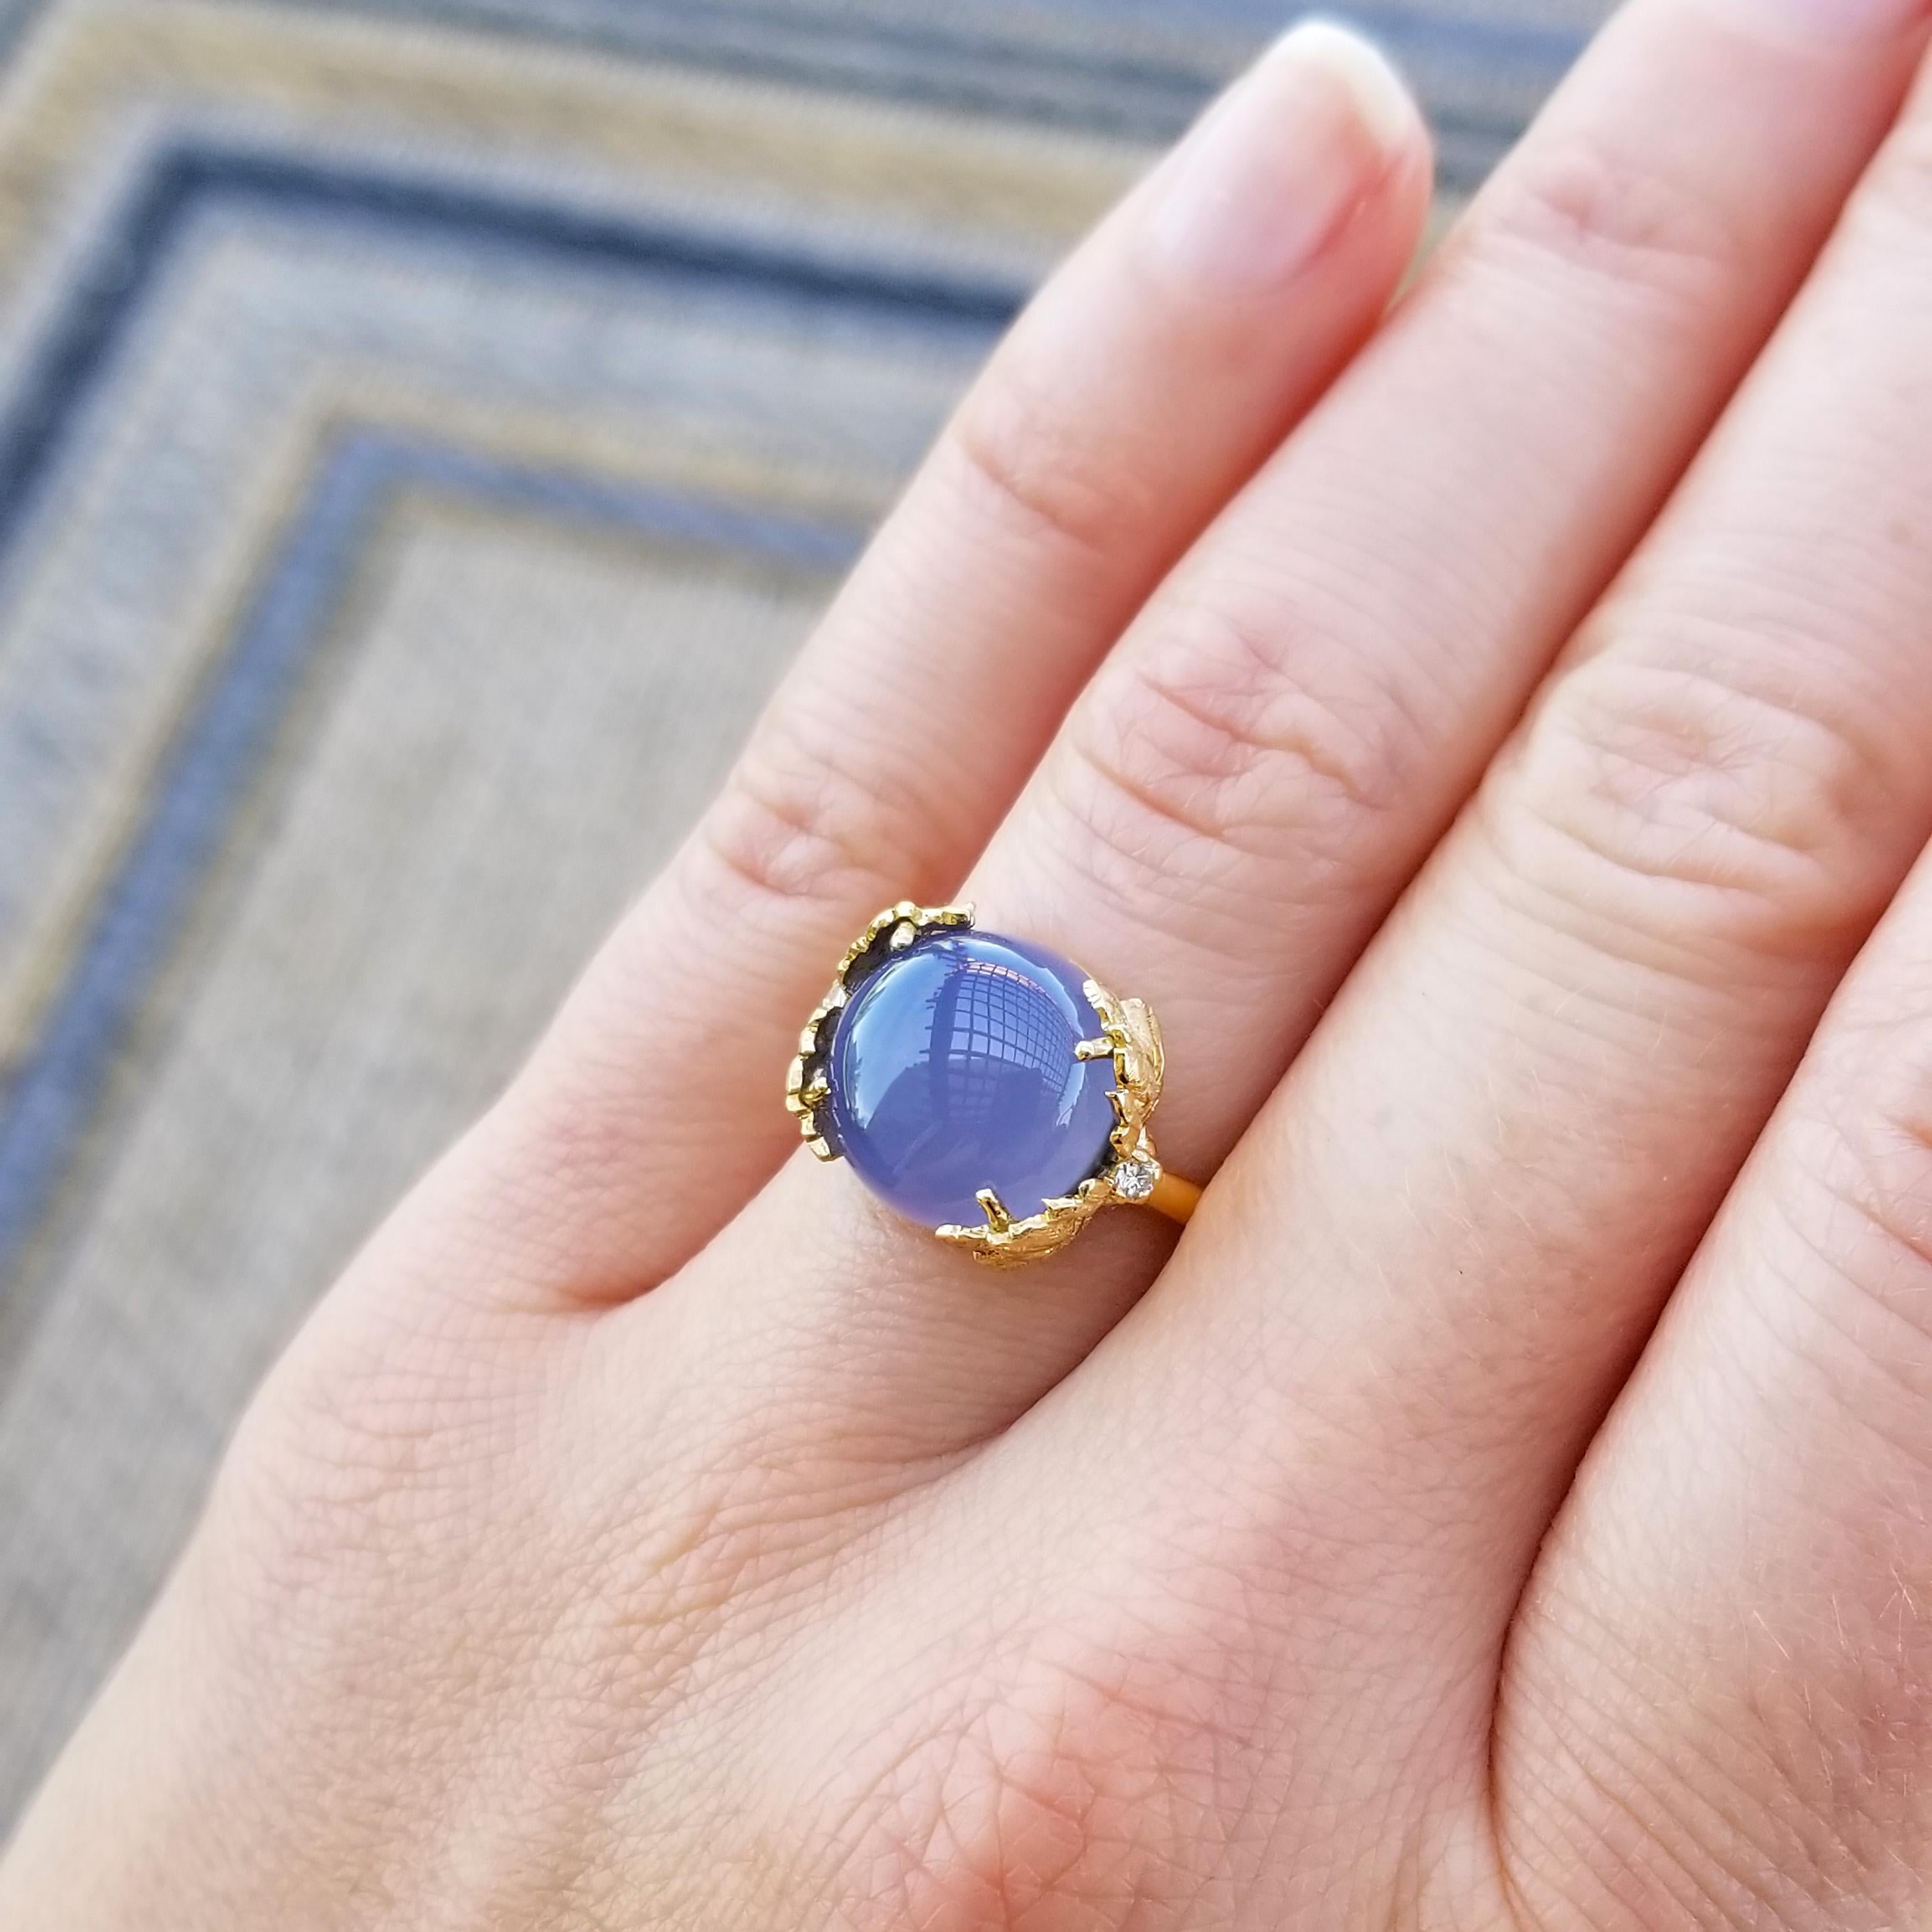 An intensely saturated violet blue chalcedony nestles luxuriously in the 18kt leaves of this custom crafted ring.

The Sylvia ring embraces this carefully chosen chalcedony in richly detailed, Florentine engraved 18kt gold leaves. This ring was